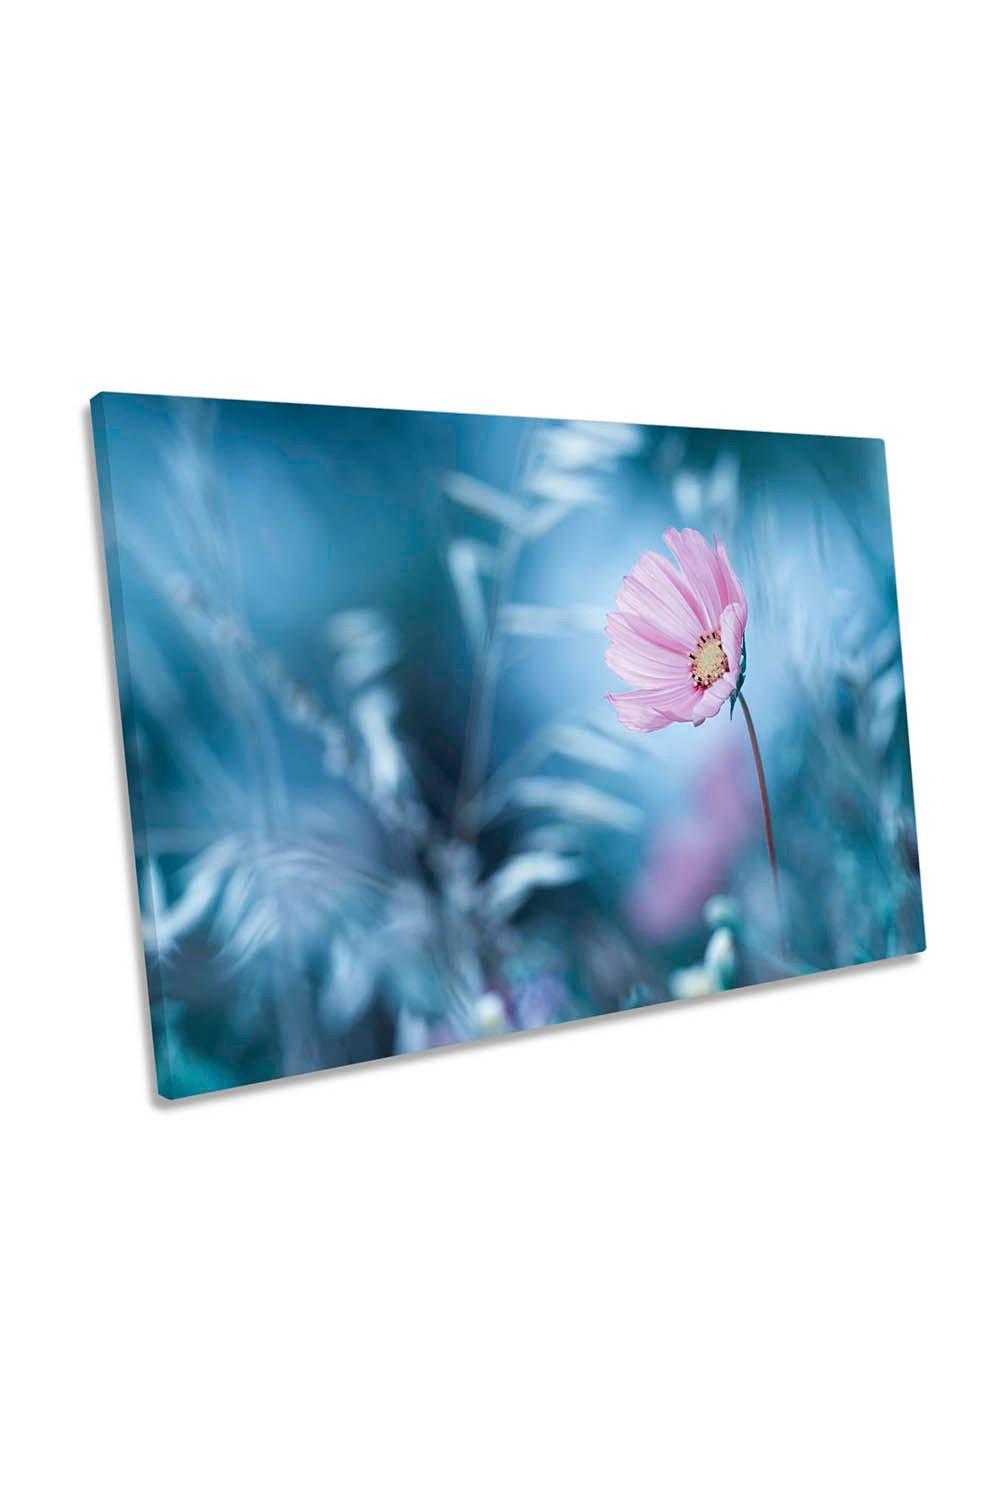 Flower Dreamland Floral Blue Canvas Wall Art Picture Print